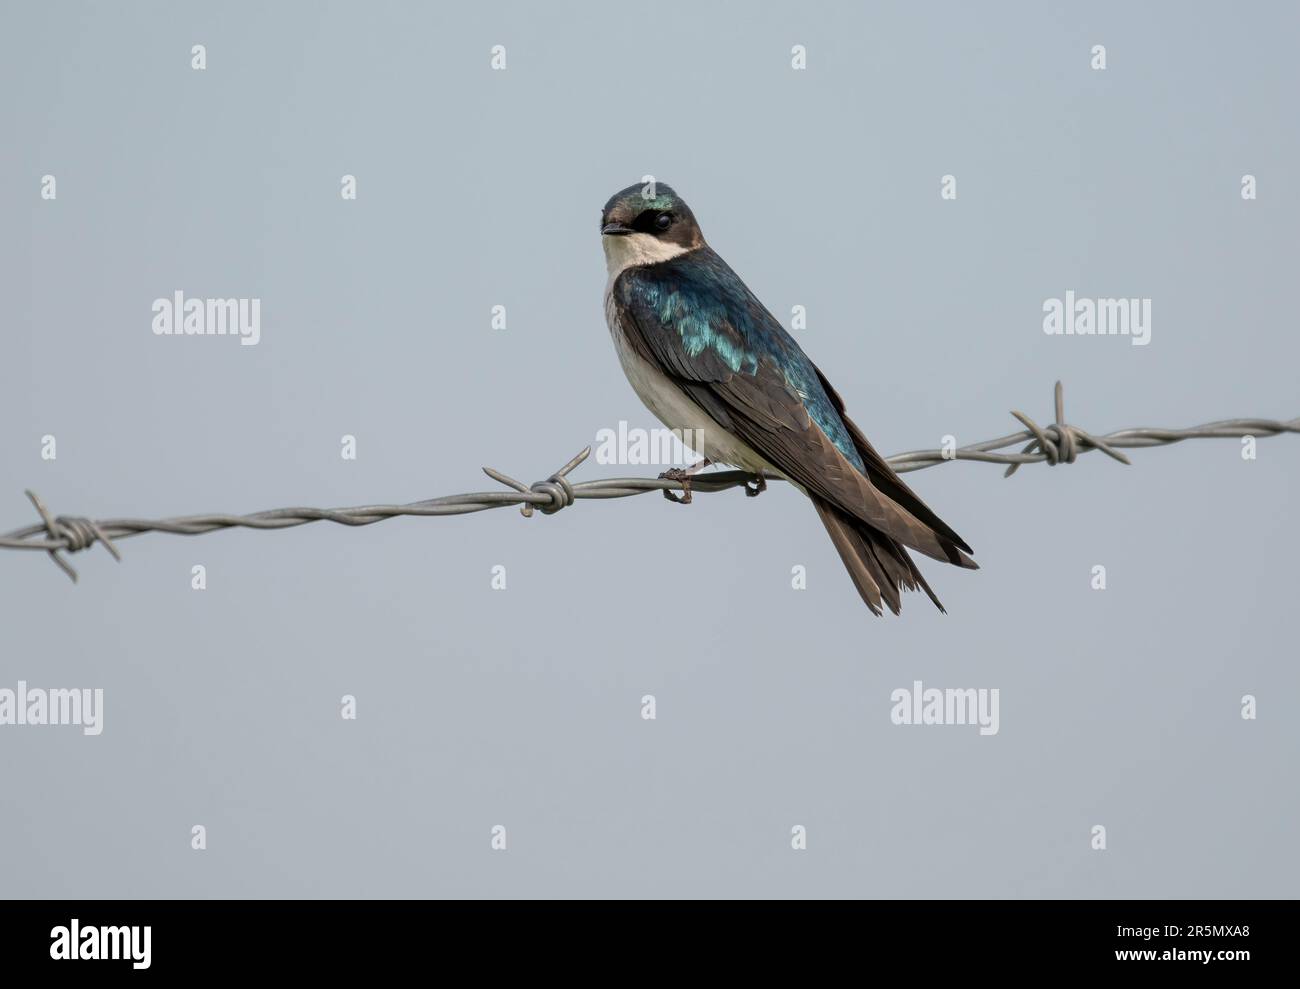 Tree swallow (Tachycineta bicolor) perched on a barbed wire fence, South of Highway 22x, Calgary,  Alberta, Canada, Stock Photo